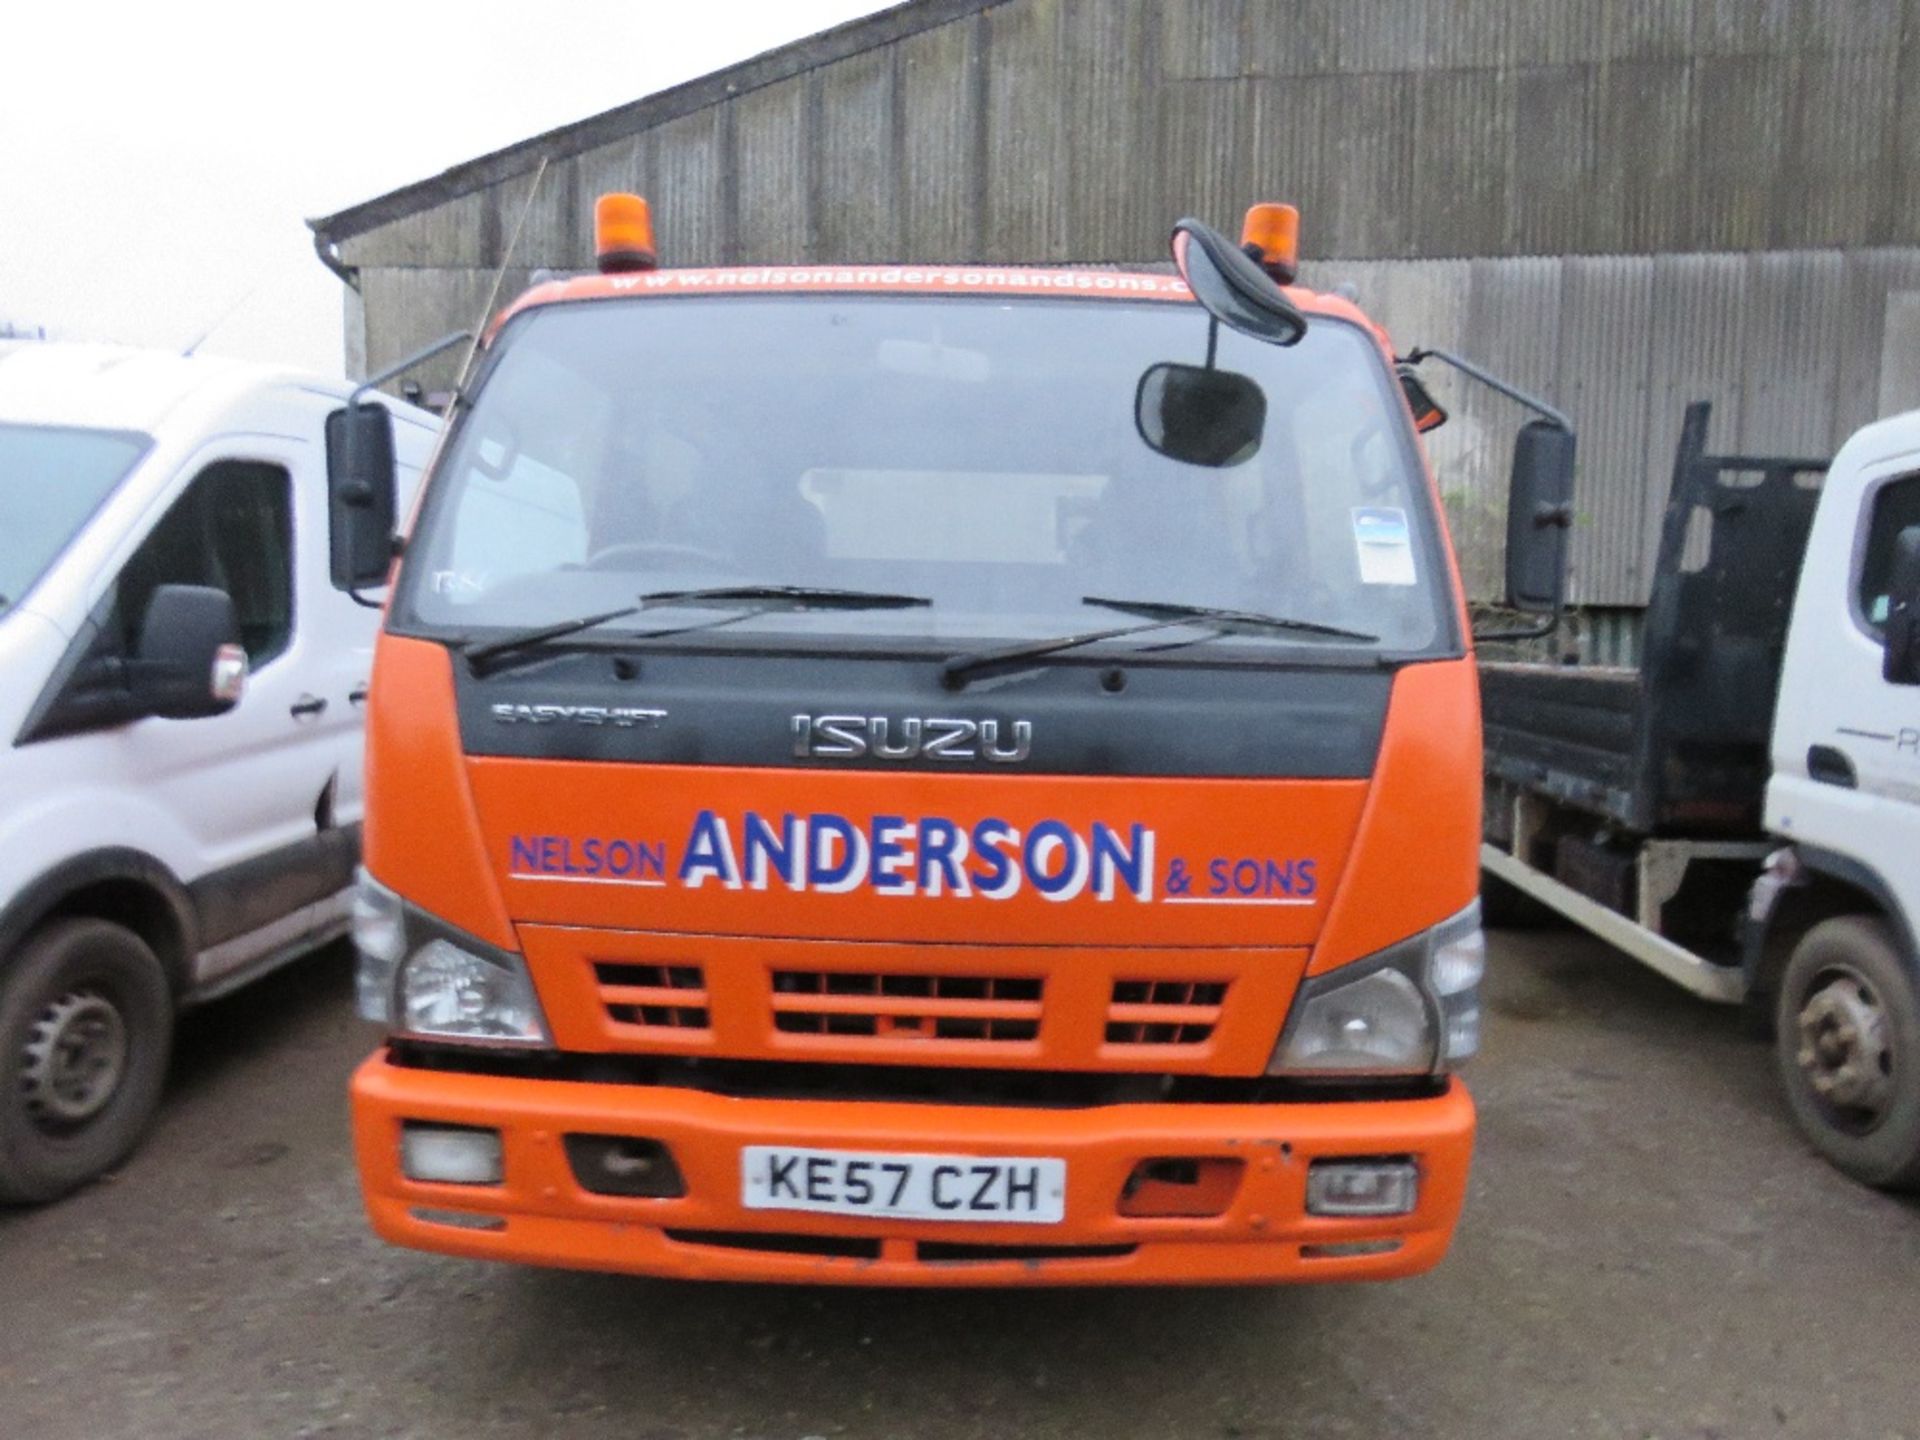 ISUZU DOUBLE CAB EASYSHIFT GEARBOX 7500KG RATED CHASSIS CAB LORRY. REG KE57 CZH. 12FT LENGTH OF CHAS - Image 2 of 9